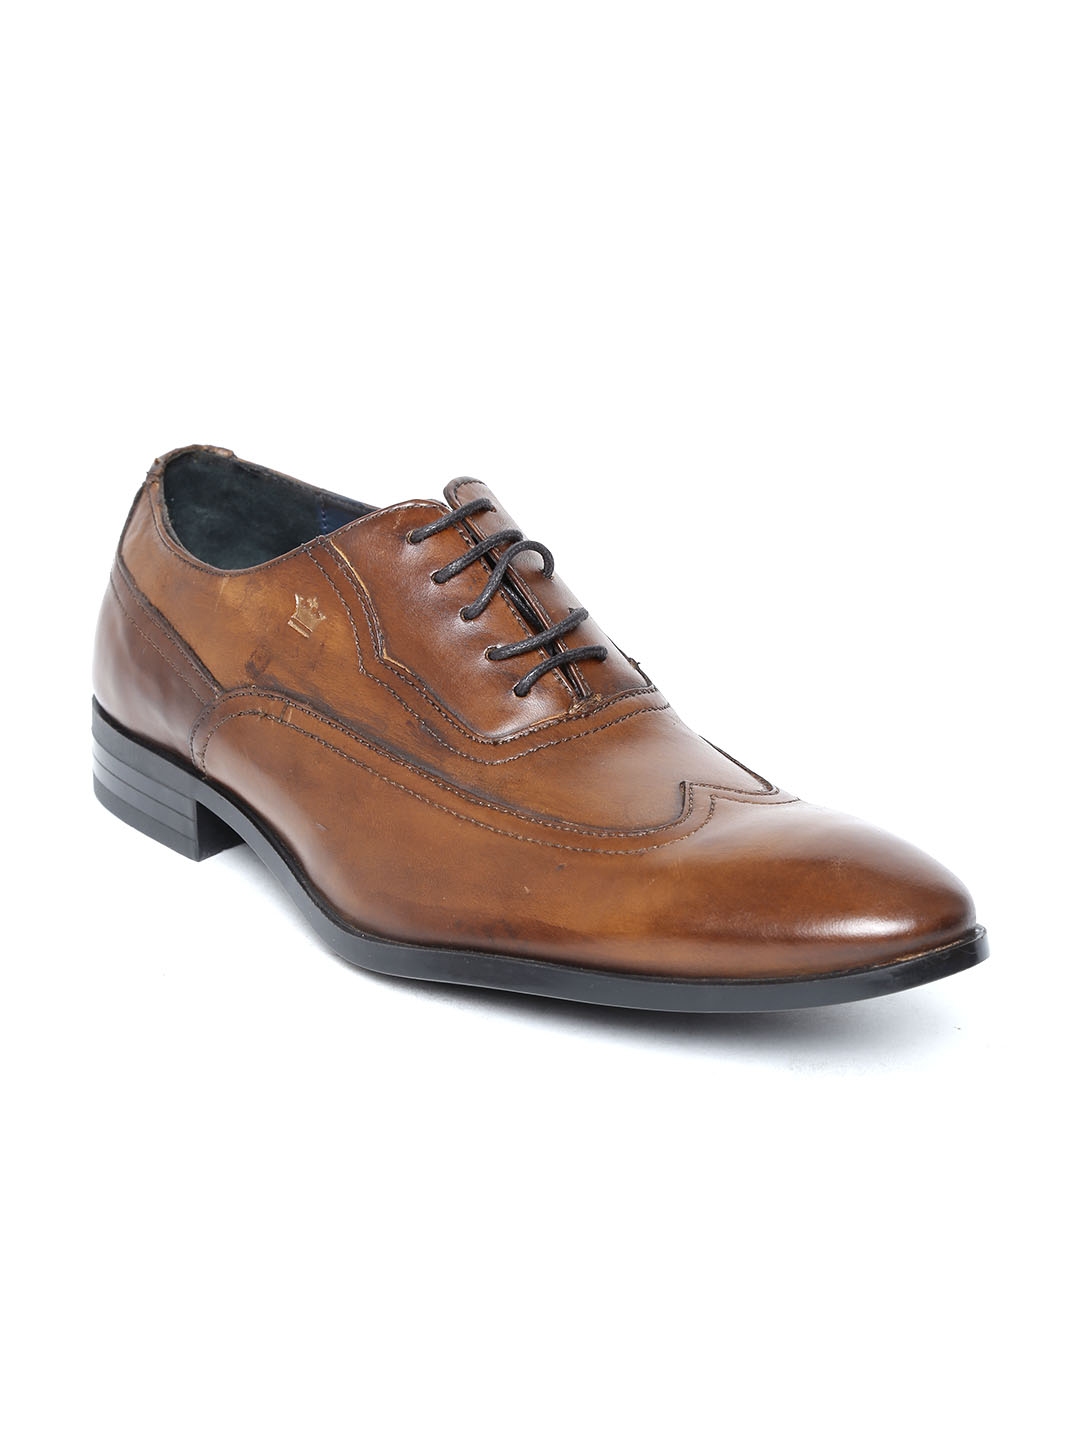 65 Casual Buy mens formal shoes online for All Gendre